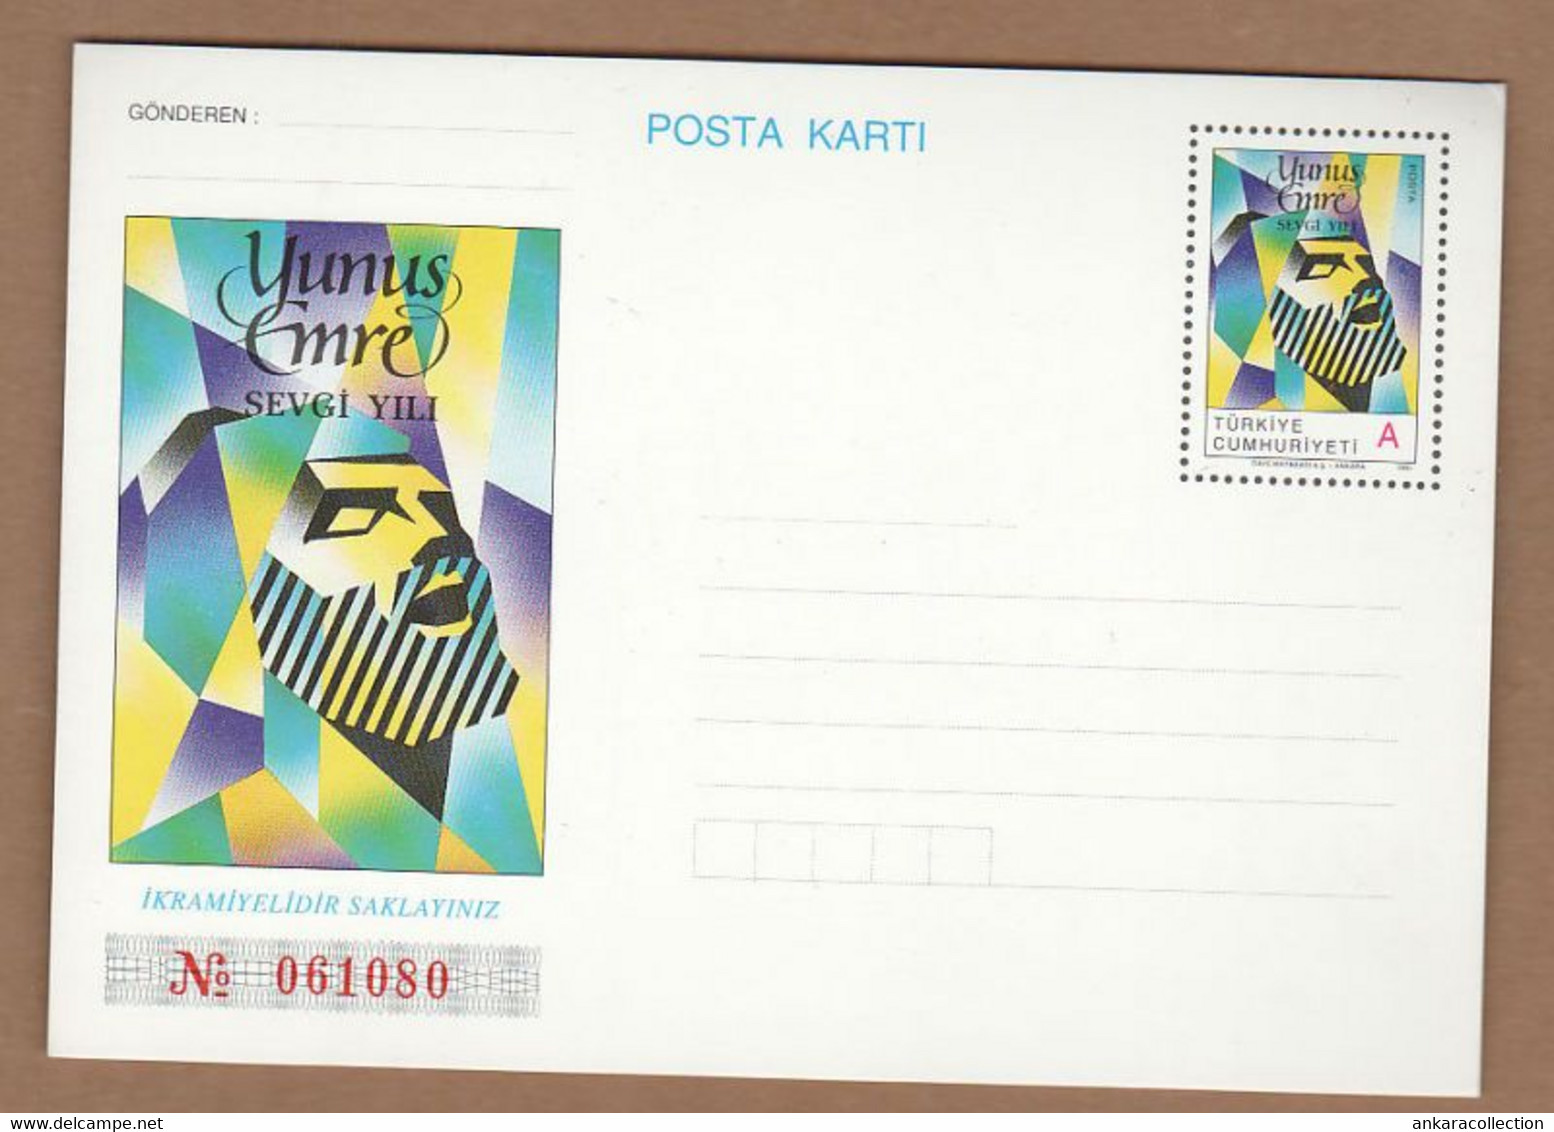 AC - TURKEY POSTAL STATIONARY - YUNUS EMRE - WITH RED SERIAL NUMBER 061080 -  01 NOVEMBER 1991 - Entiers Postaux